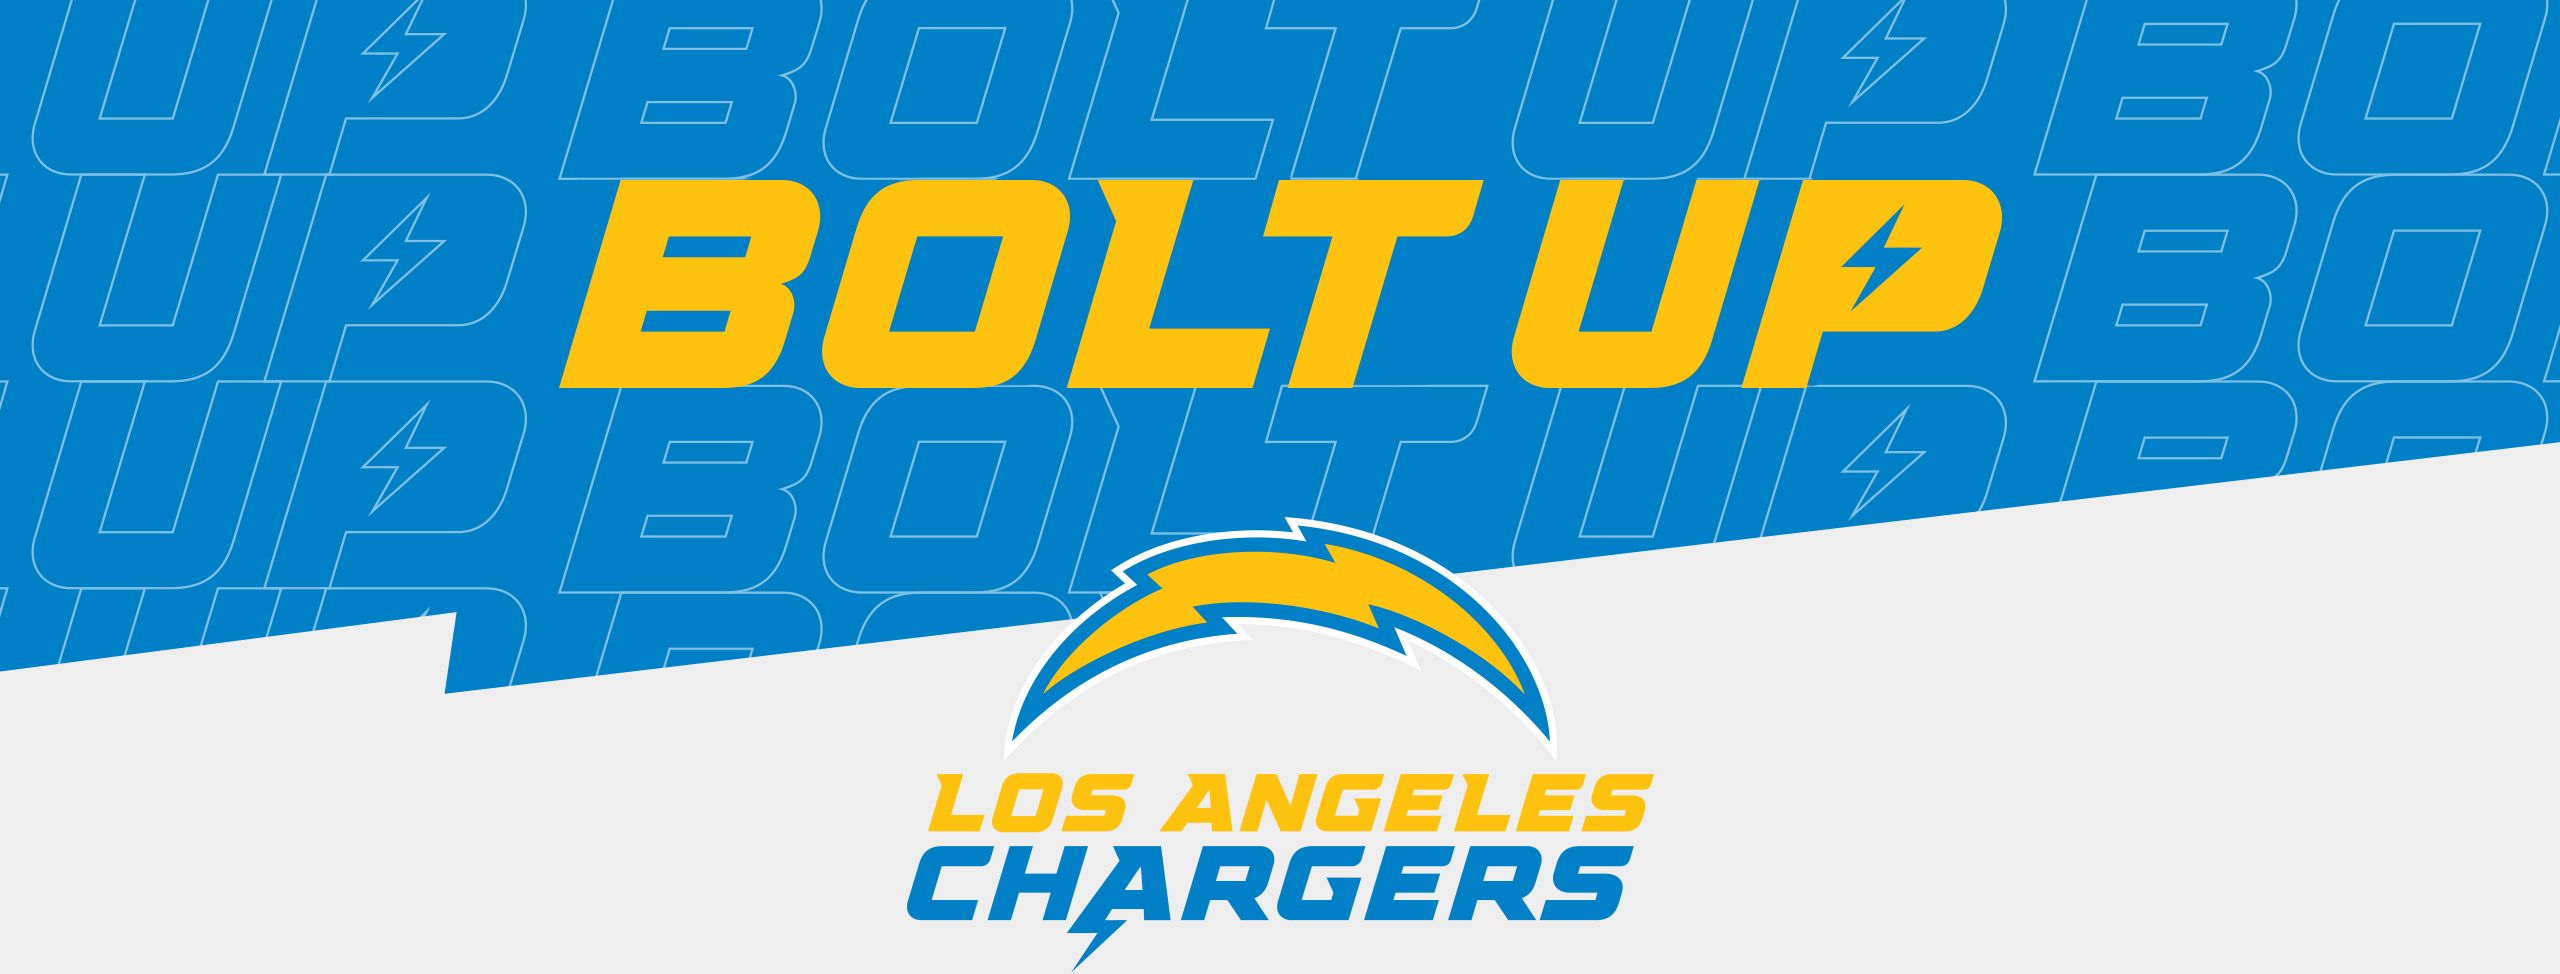 Chargers News: Bolts reportedly getting new uniforms, logo - Bolts